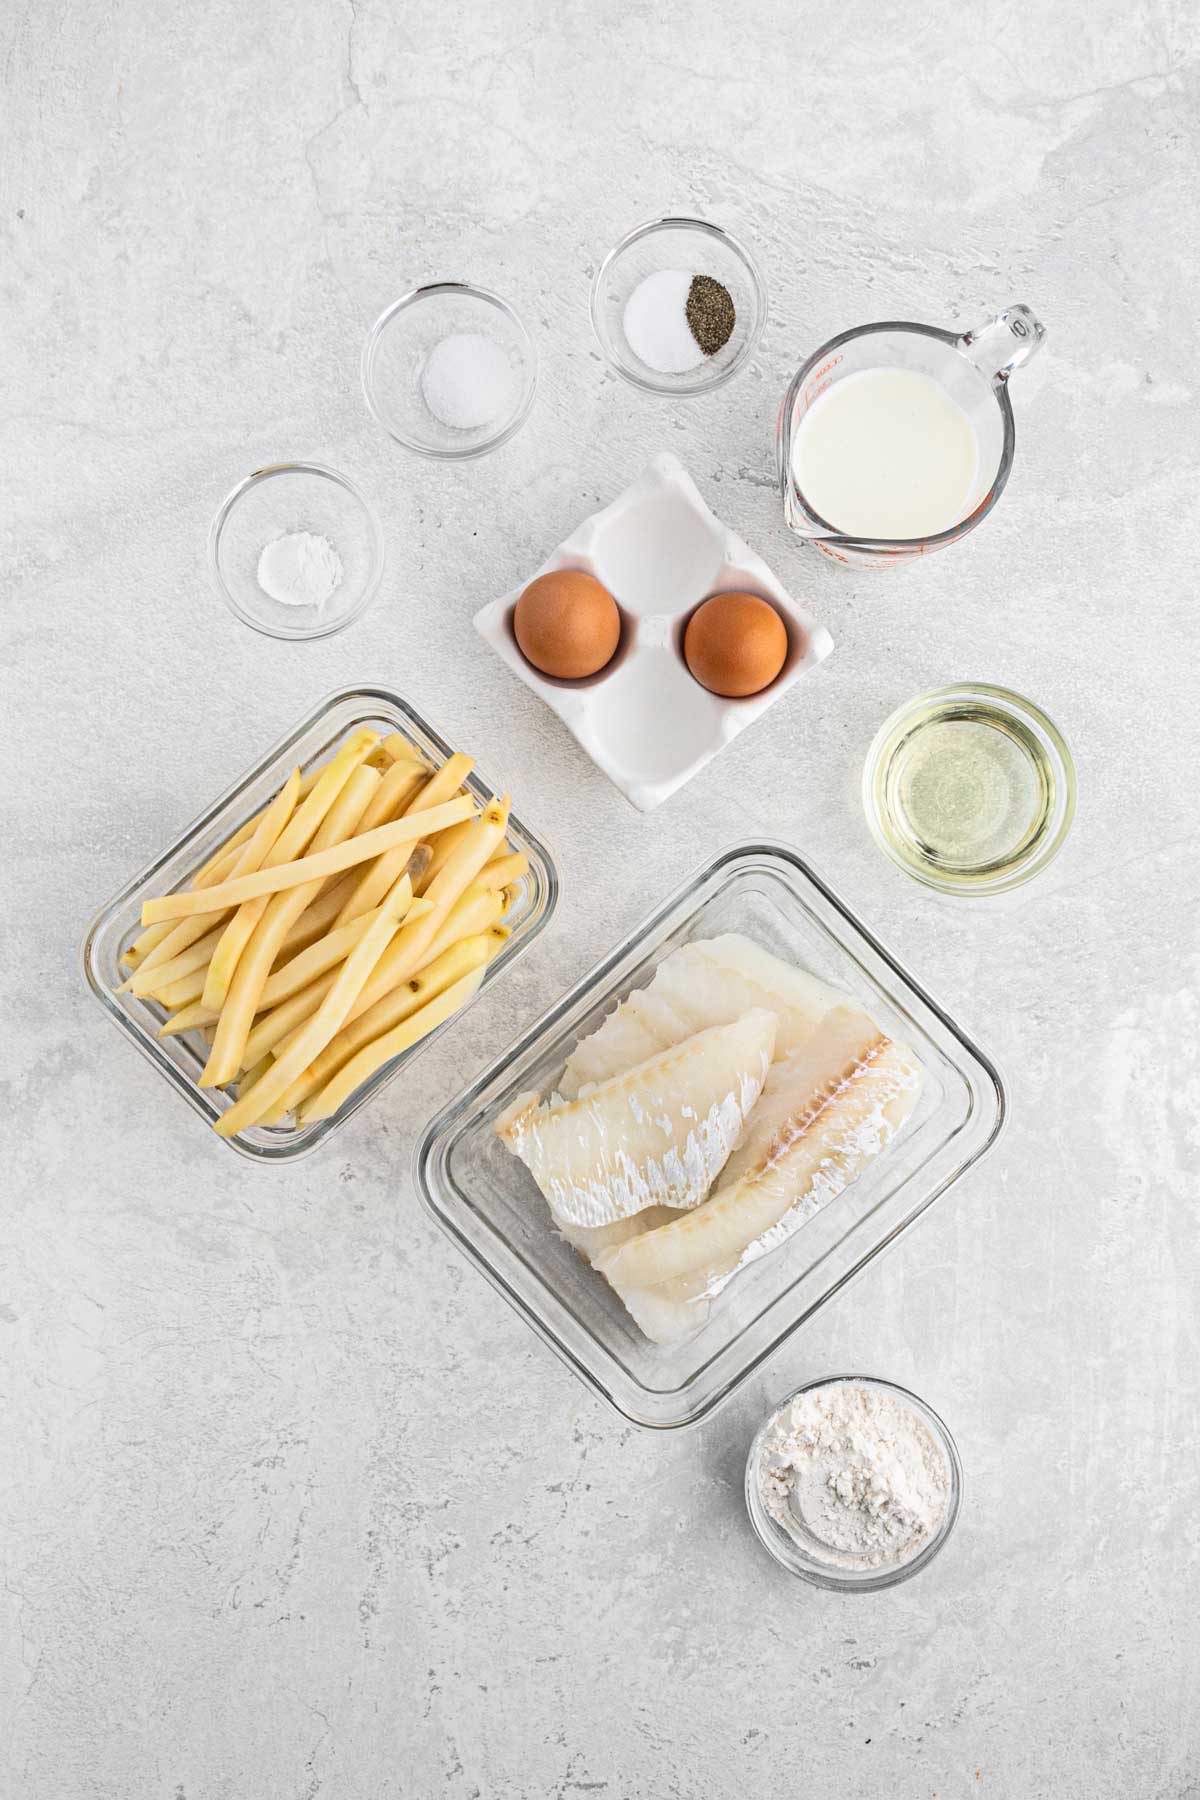 Ingredients to make fish and chips on the table.